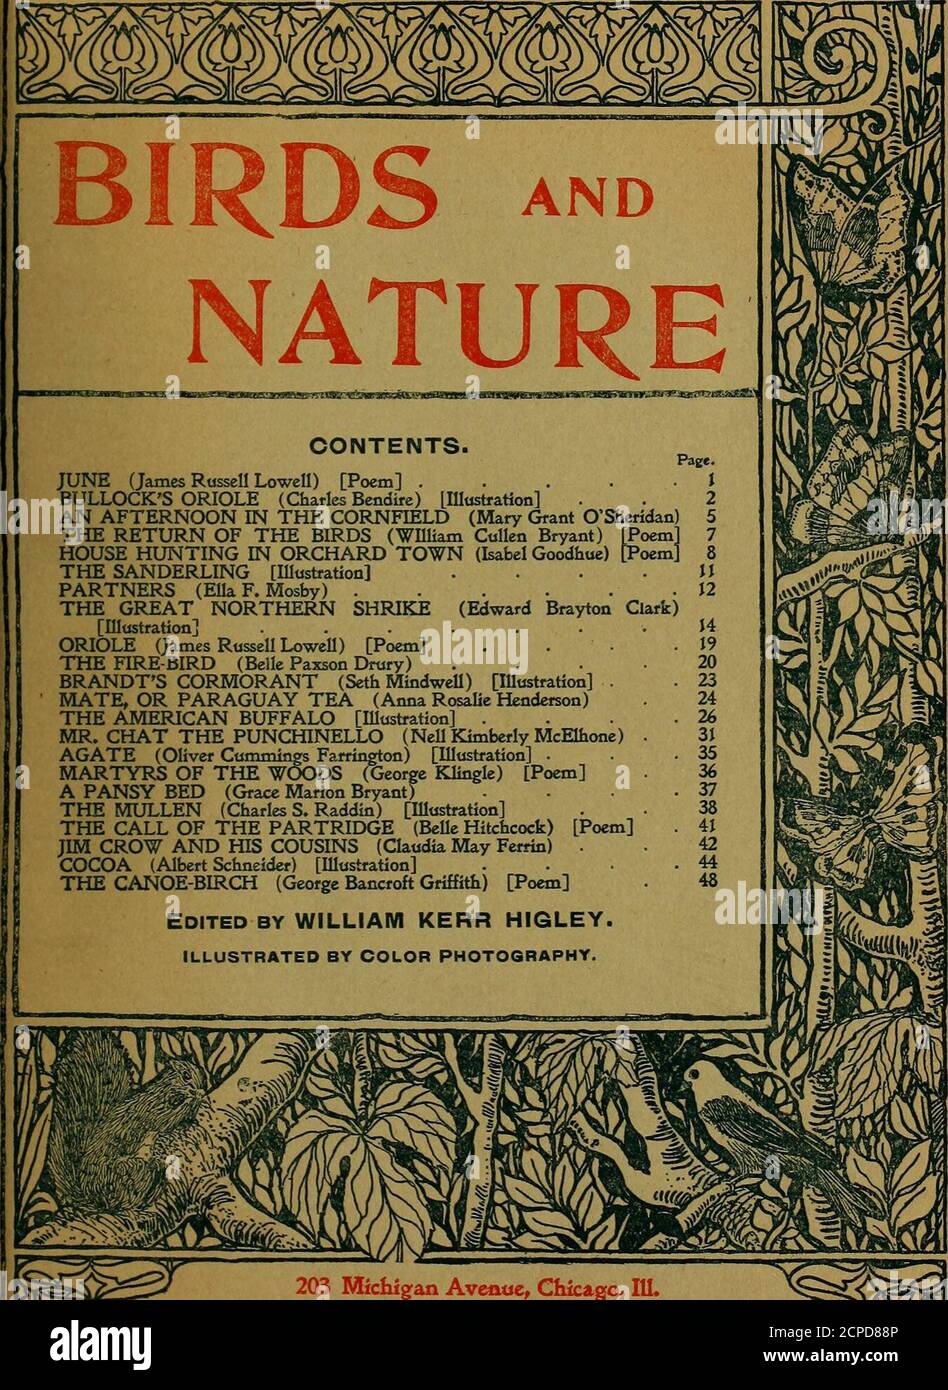 . Birds and nature . s Bendire) [Illustration] AN AFTERNOON IN THE CORNFIELD (Mary Grant OSheridan) THE RETURN OF THE BIRDS (William Cullen Bryant) Poem] HOUSE HUNTING IN ORCHARD TOWN (Isabel Goodhue) THE SANDERLING [Illustration] PARTNERS (EllaF. Mosby) THE GREAT NORTHERN SHRIKE (Edward Brayton[Illustration] ...... ORIOLE (James Russell Lowell) [Poem] . THE FIRE-BIRD (Belle Paxson Drury) BRANDTS CORMORANT (Seth Mindwell) [Illustration] . MATE, OR PARAGUAY TEA (Anna Rosalie Henderson) THE AMERICAN BUFFALO [Illustration] . MR. CHAT THE PUNCHINELLO (NellKimberly McElhone) AGATE (Oliver Cummings Stock Photo